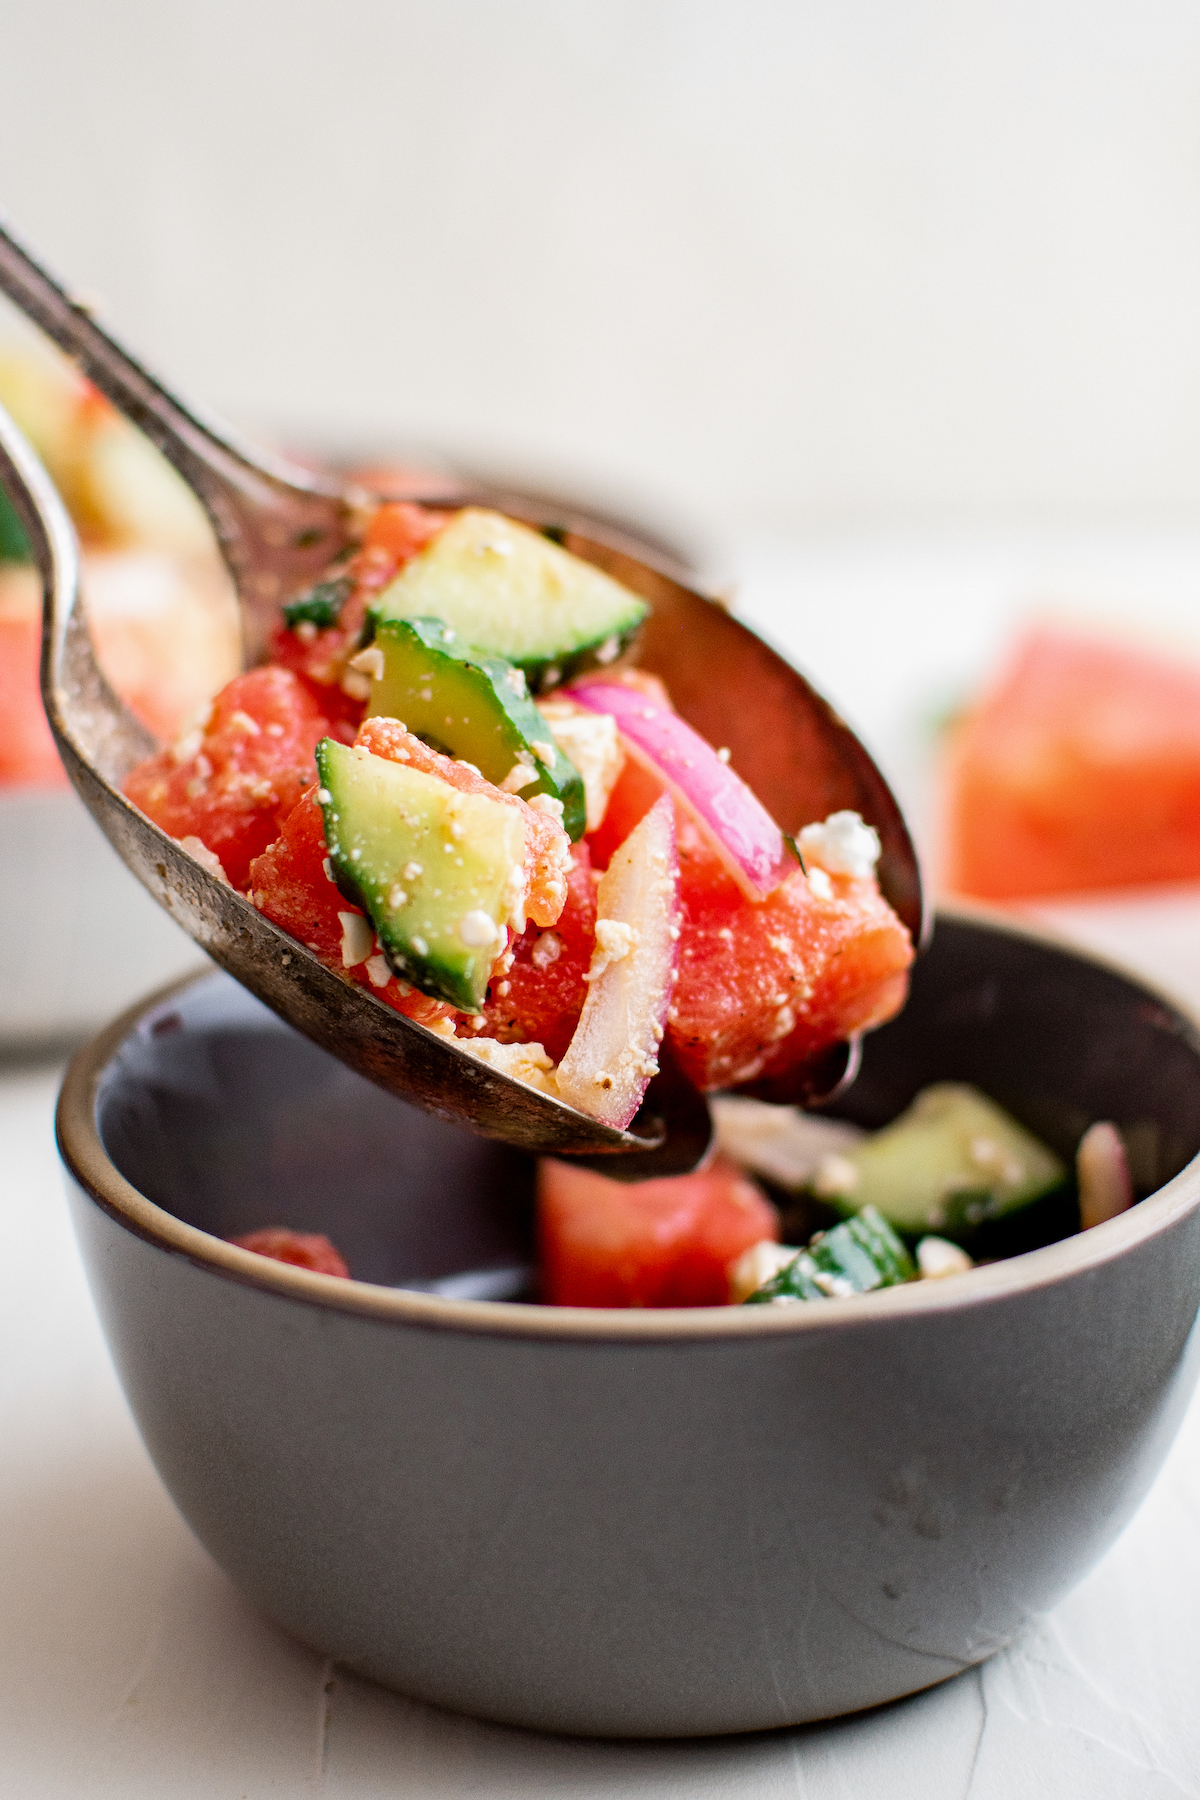 A small salad bowl is being filled with watermelon feta salad.